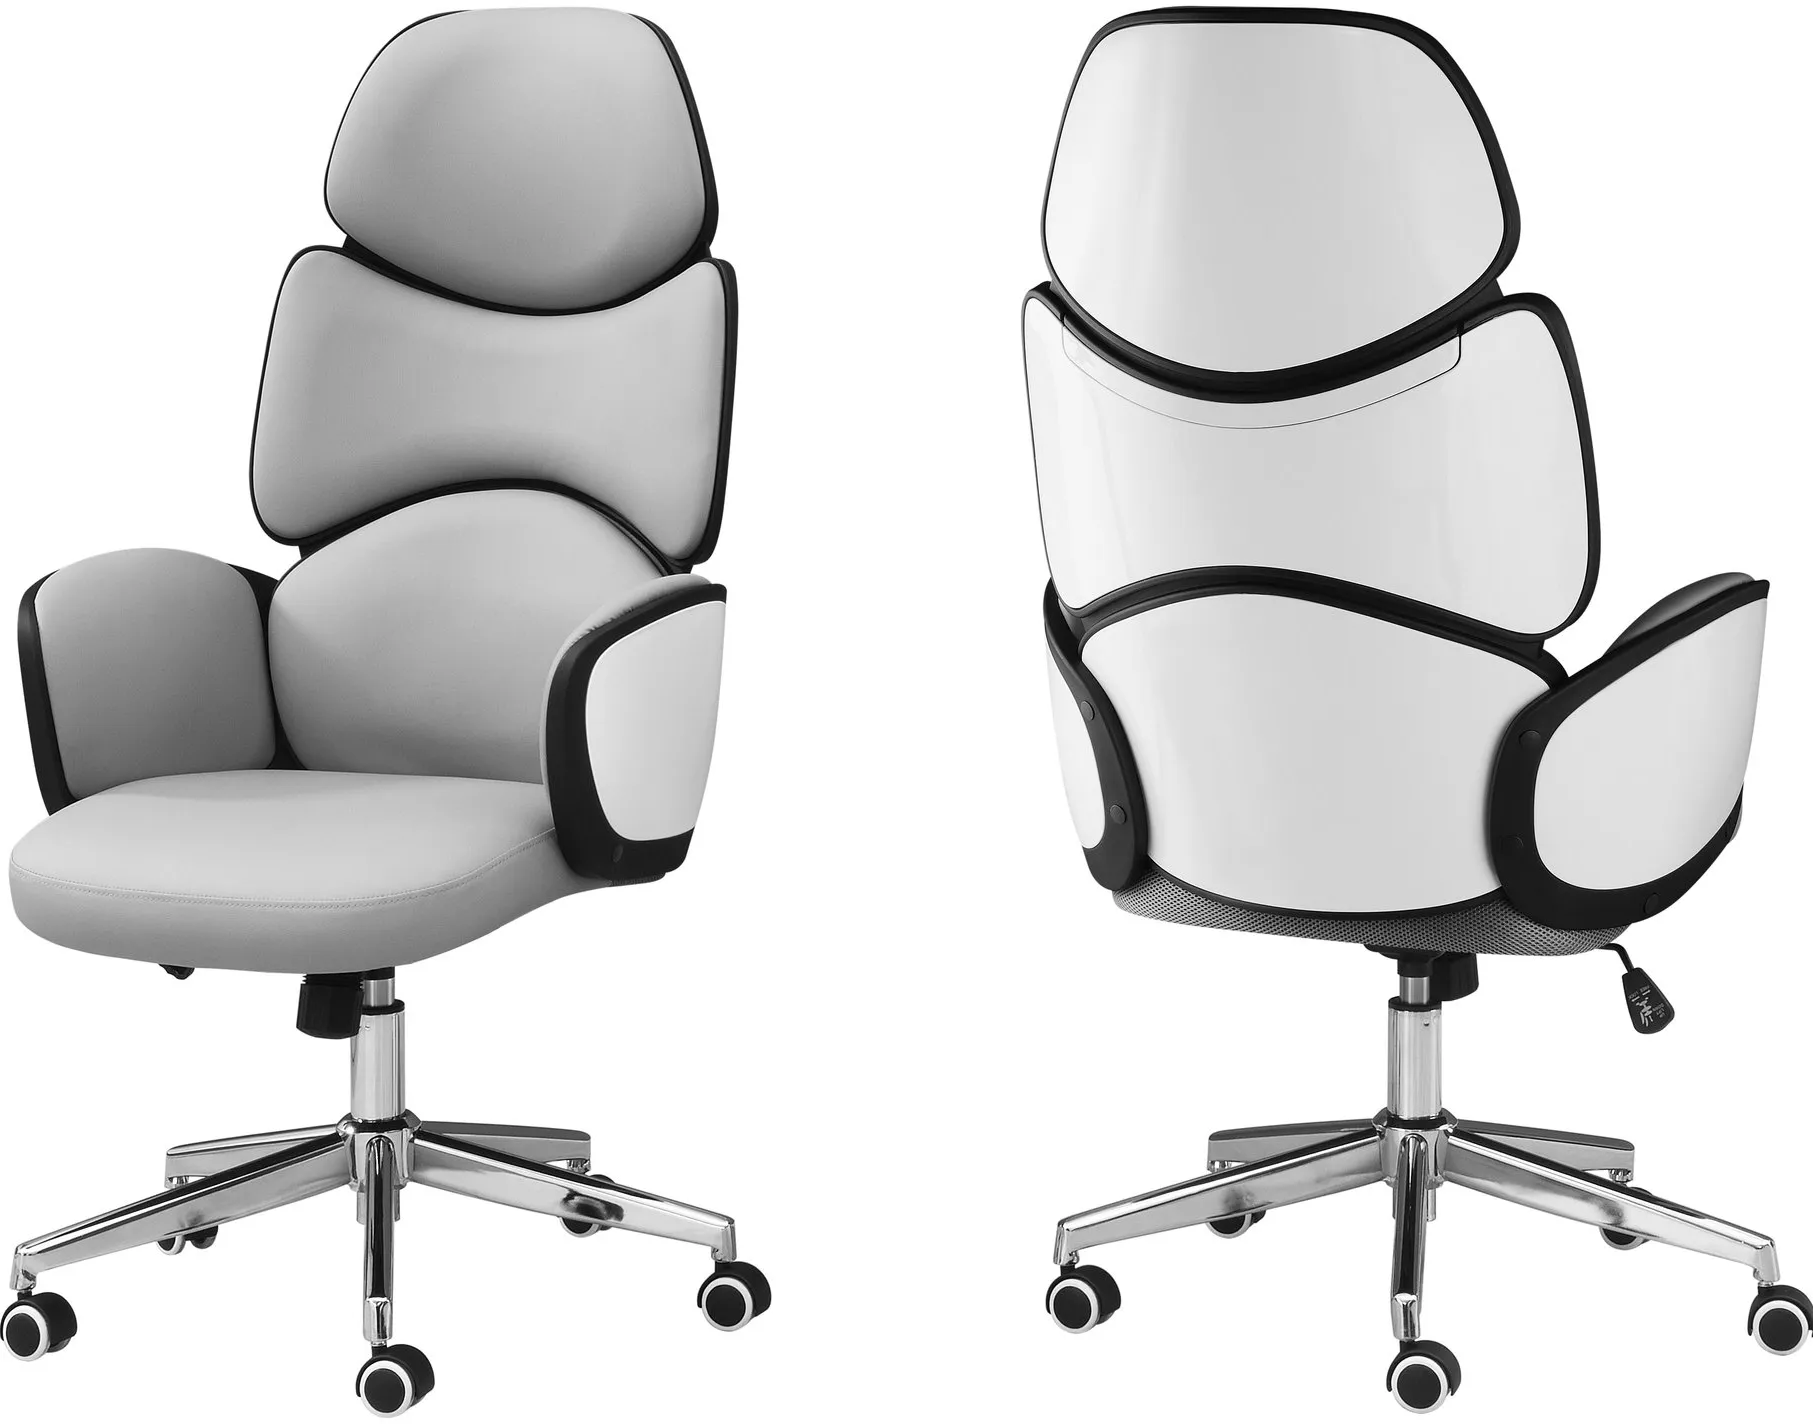 Office Chair, Adjustable Height, Swivel, Ergonomic, Armrests, Computer Desk, Work, Metal, Pu Leather Look, White, Grey, Chrome, Contemporary, Modern